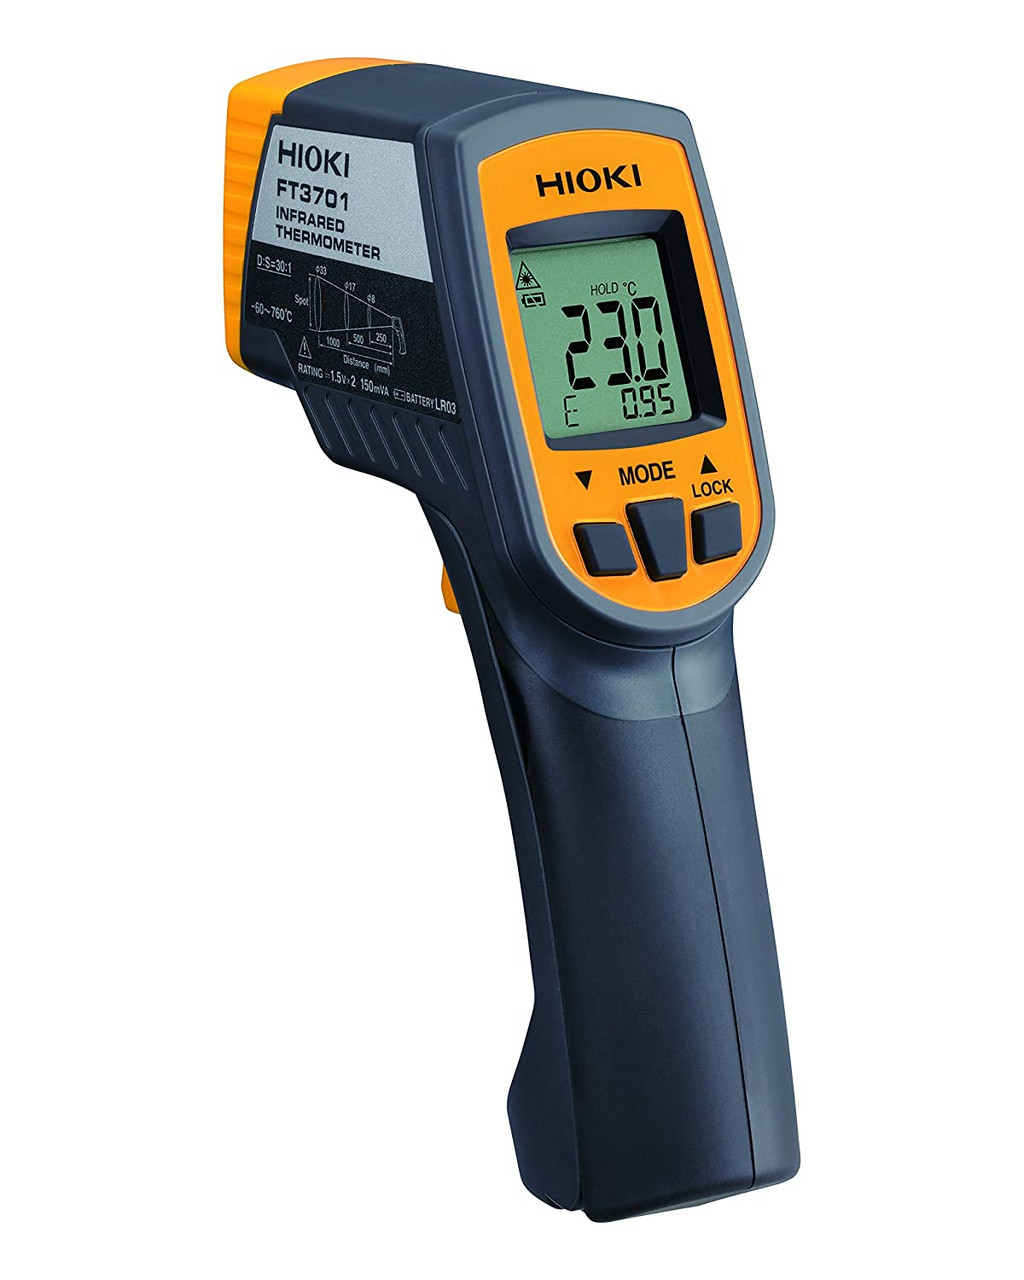 HIOKI FT3701 INFRARED THERMOMETER